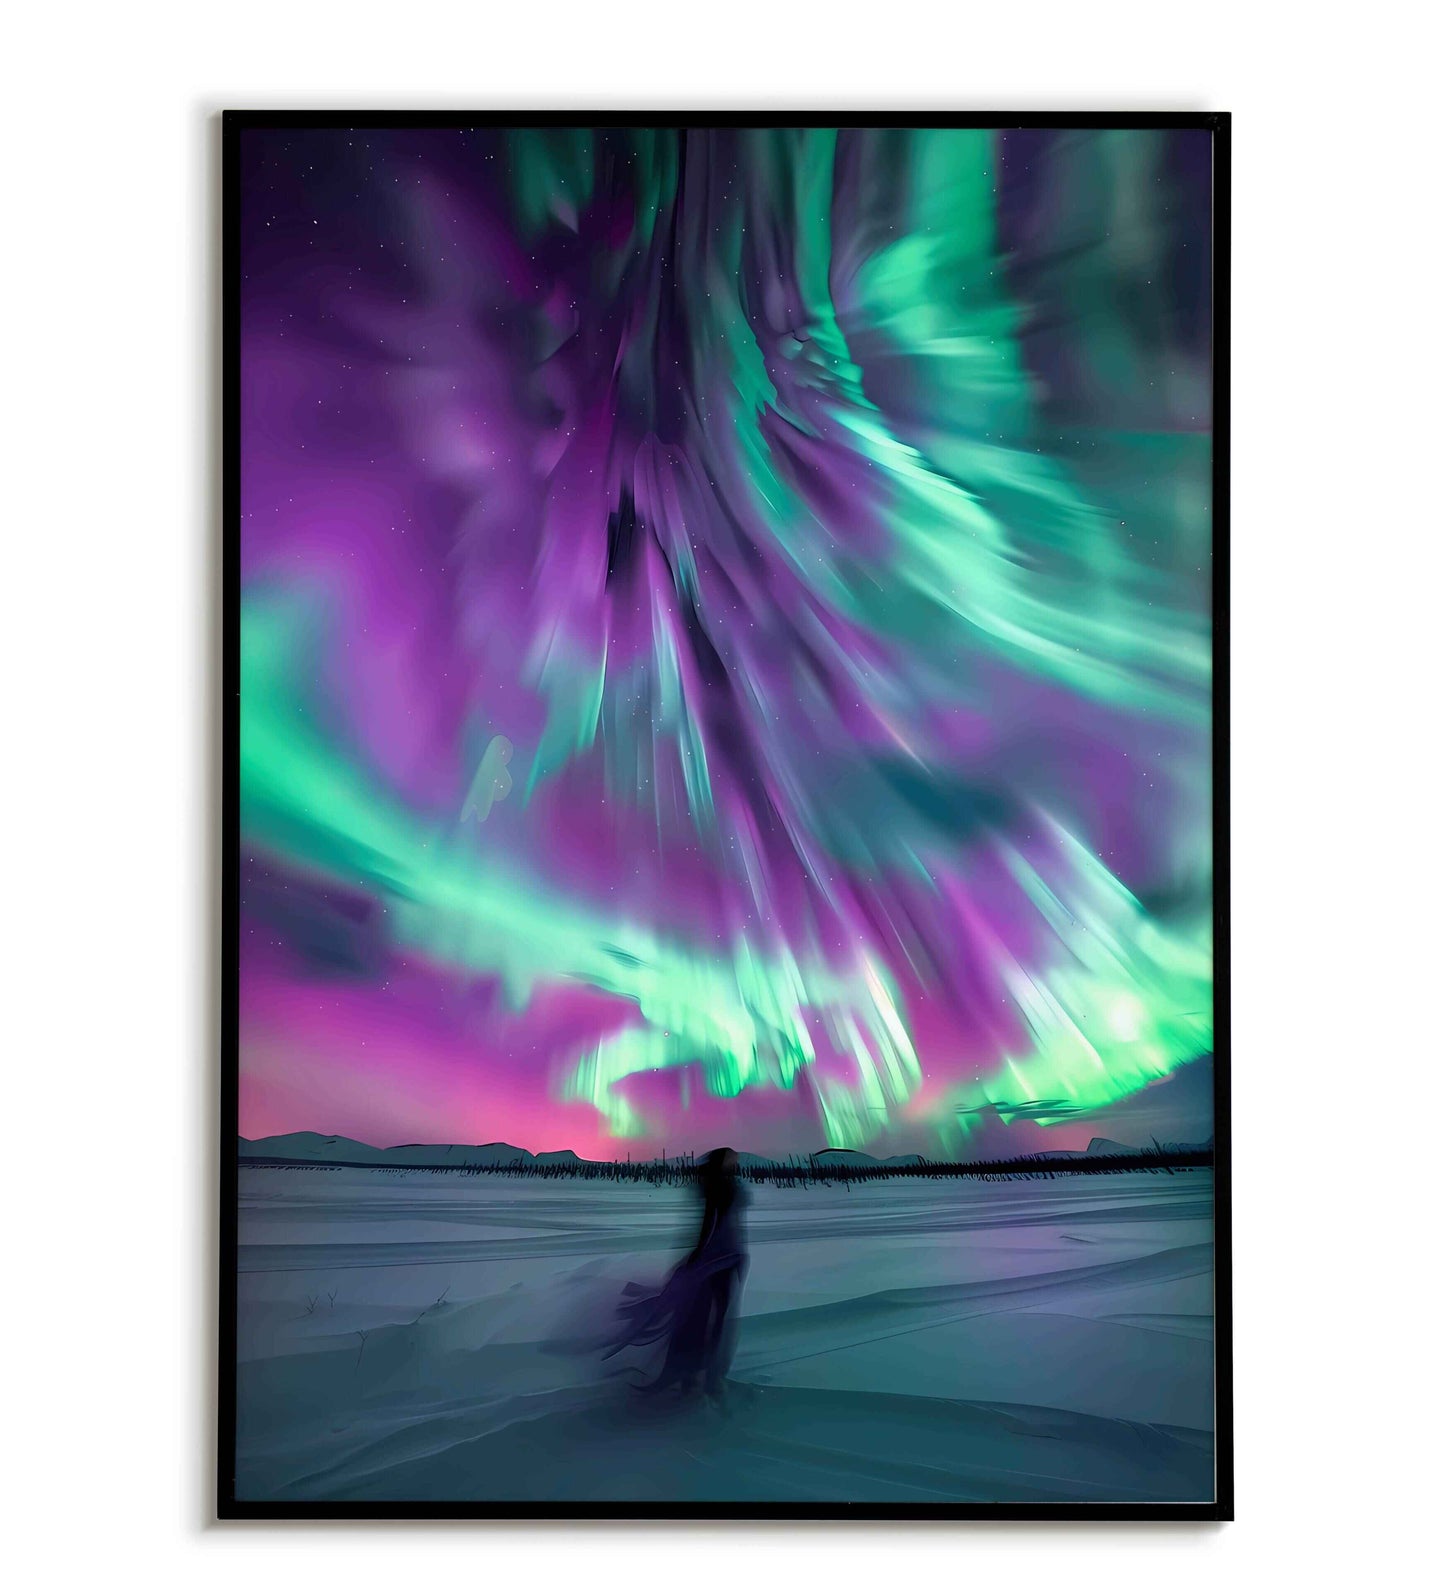 Northern Lights(2 of 2) nature printable poster. Available for purchase as a physical poster or digital download.